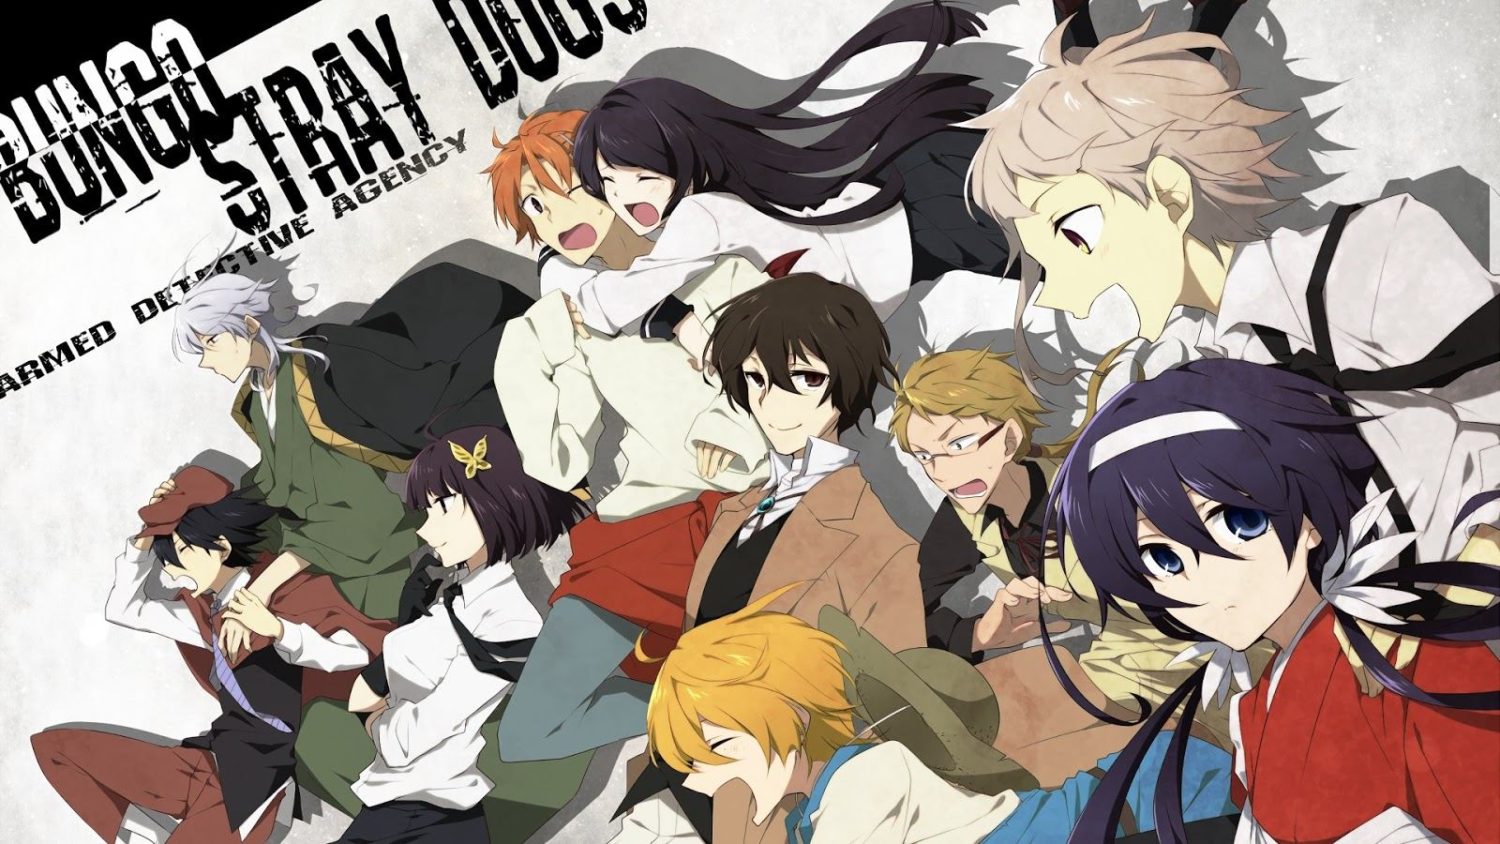 Bungou Stray Dogs featured